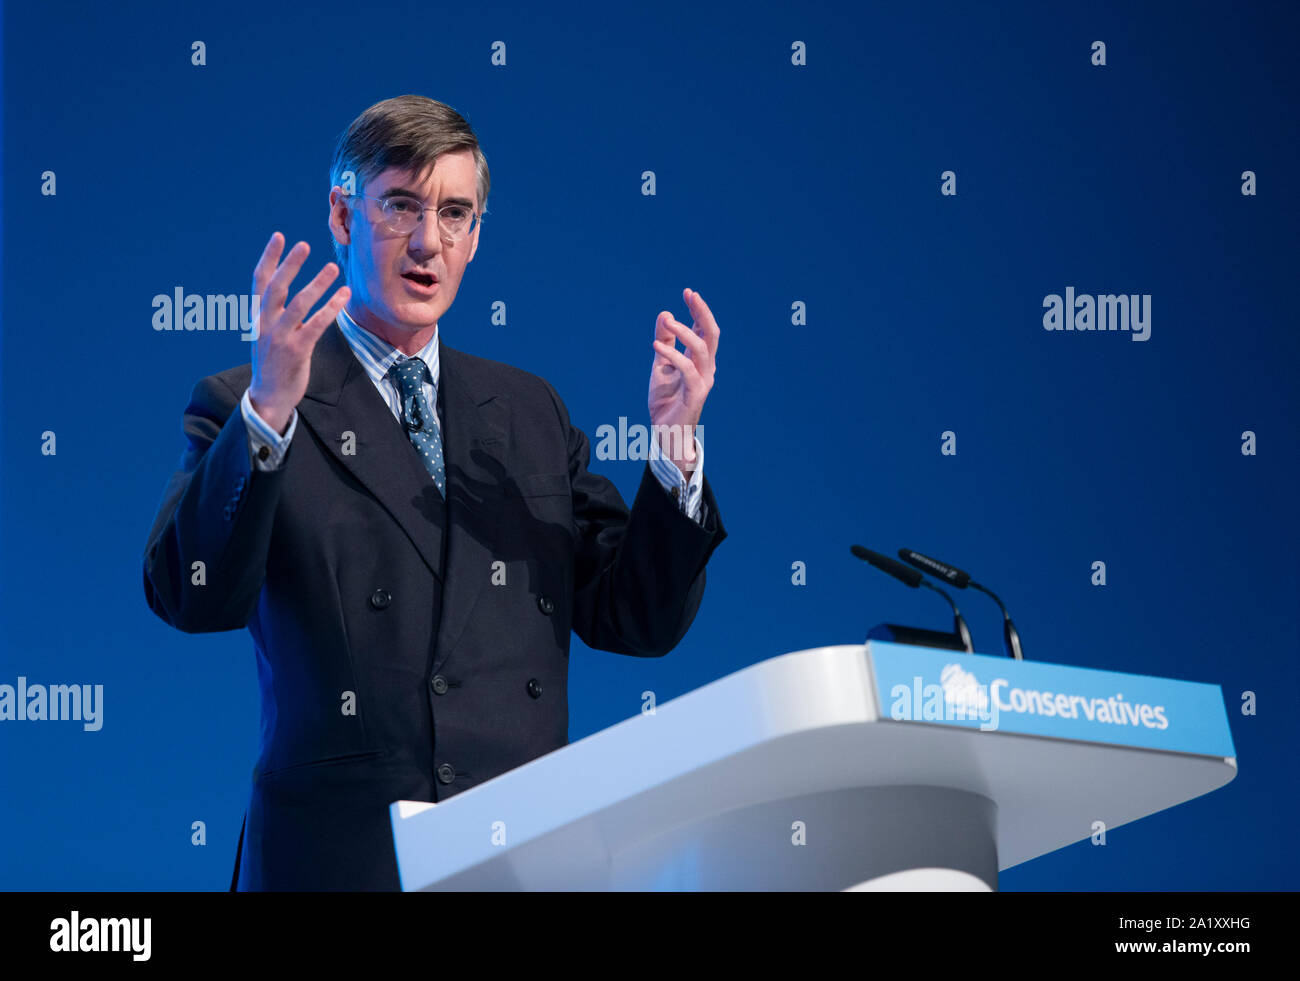 Manchester, UK. 29th September 2019. Jacob Rees-Mogg, Leader of the House of Commons, Lord President of the Council and MP for North East Somerset speaks at day one of the Conservative Party Conference in Manchester. © Russell Hart/Alamy Live News. Stock Photo